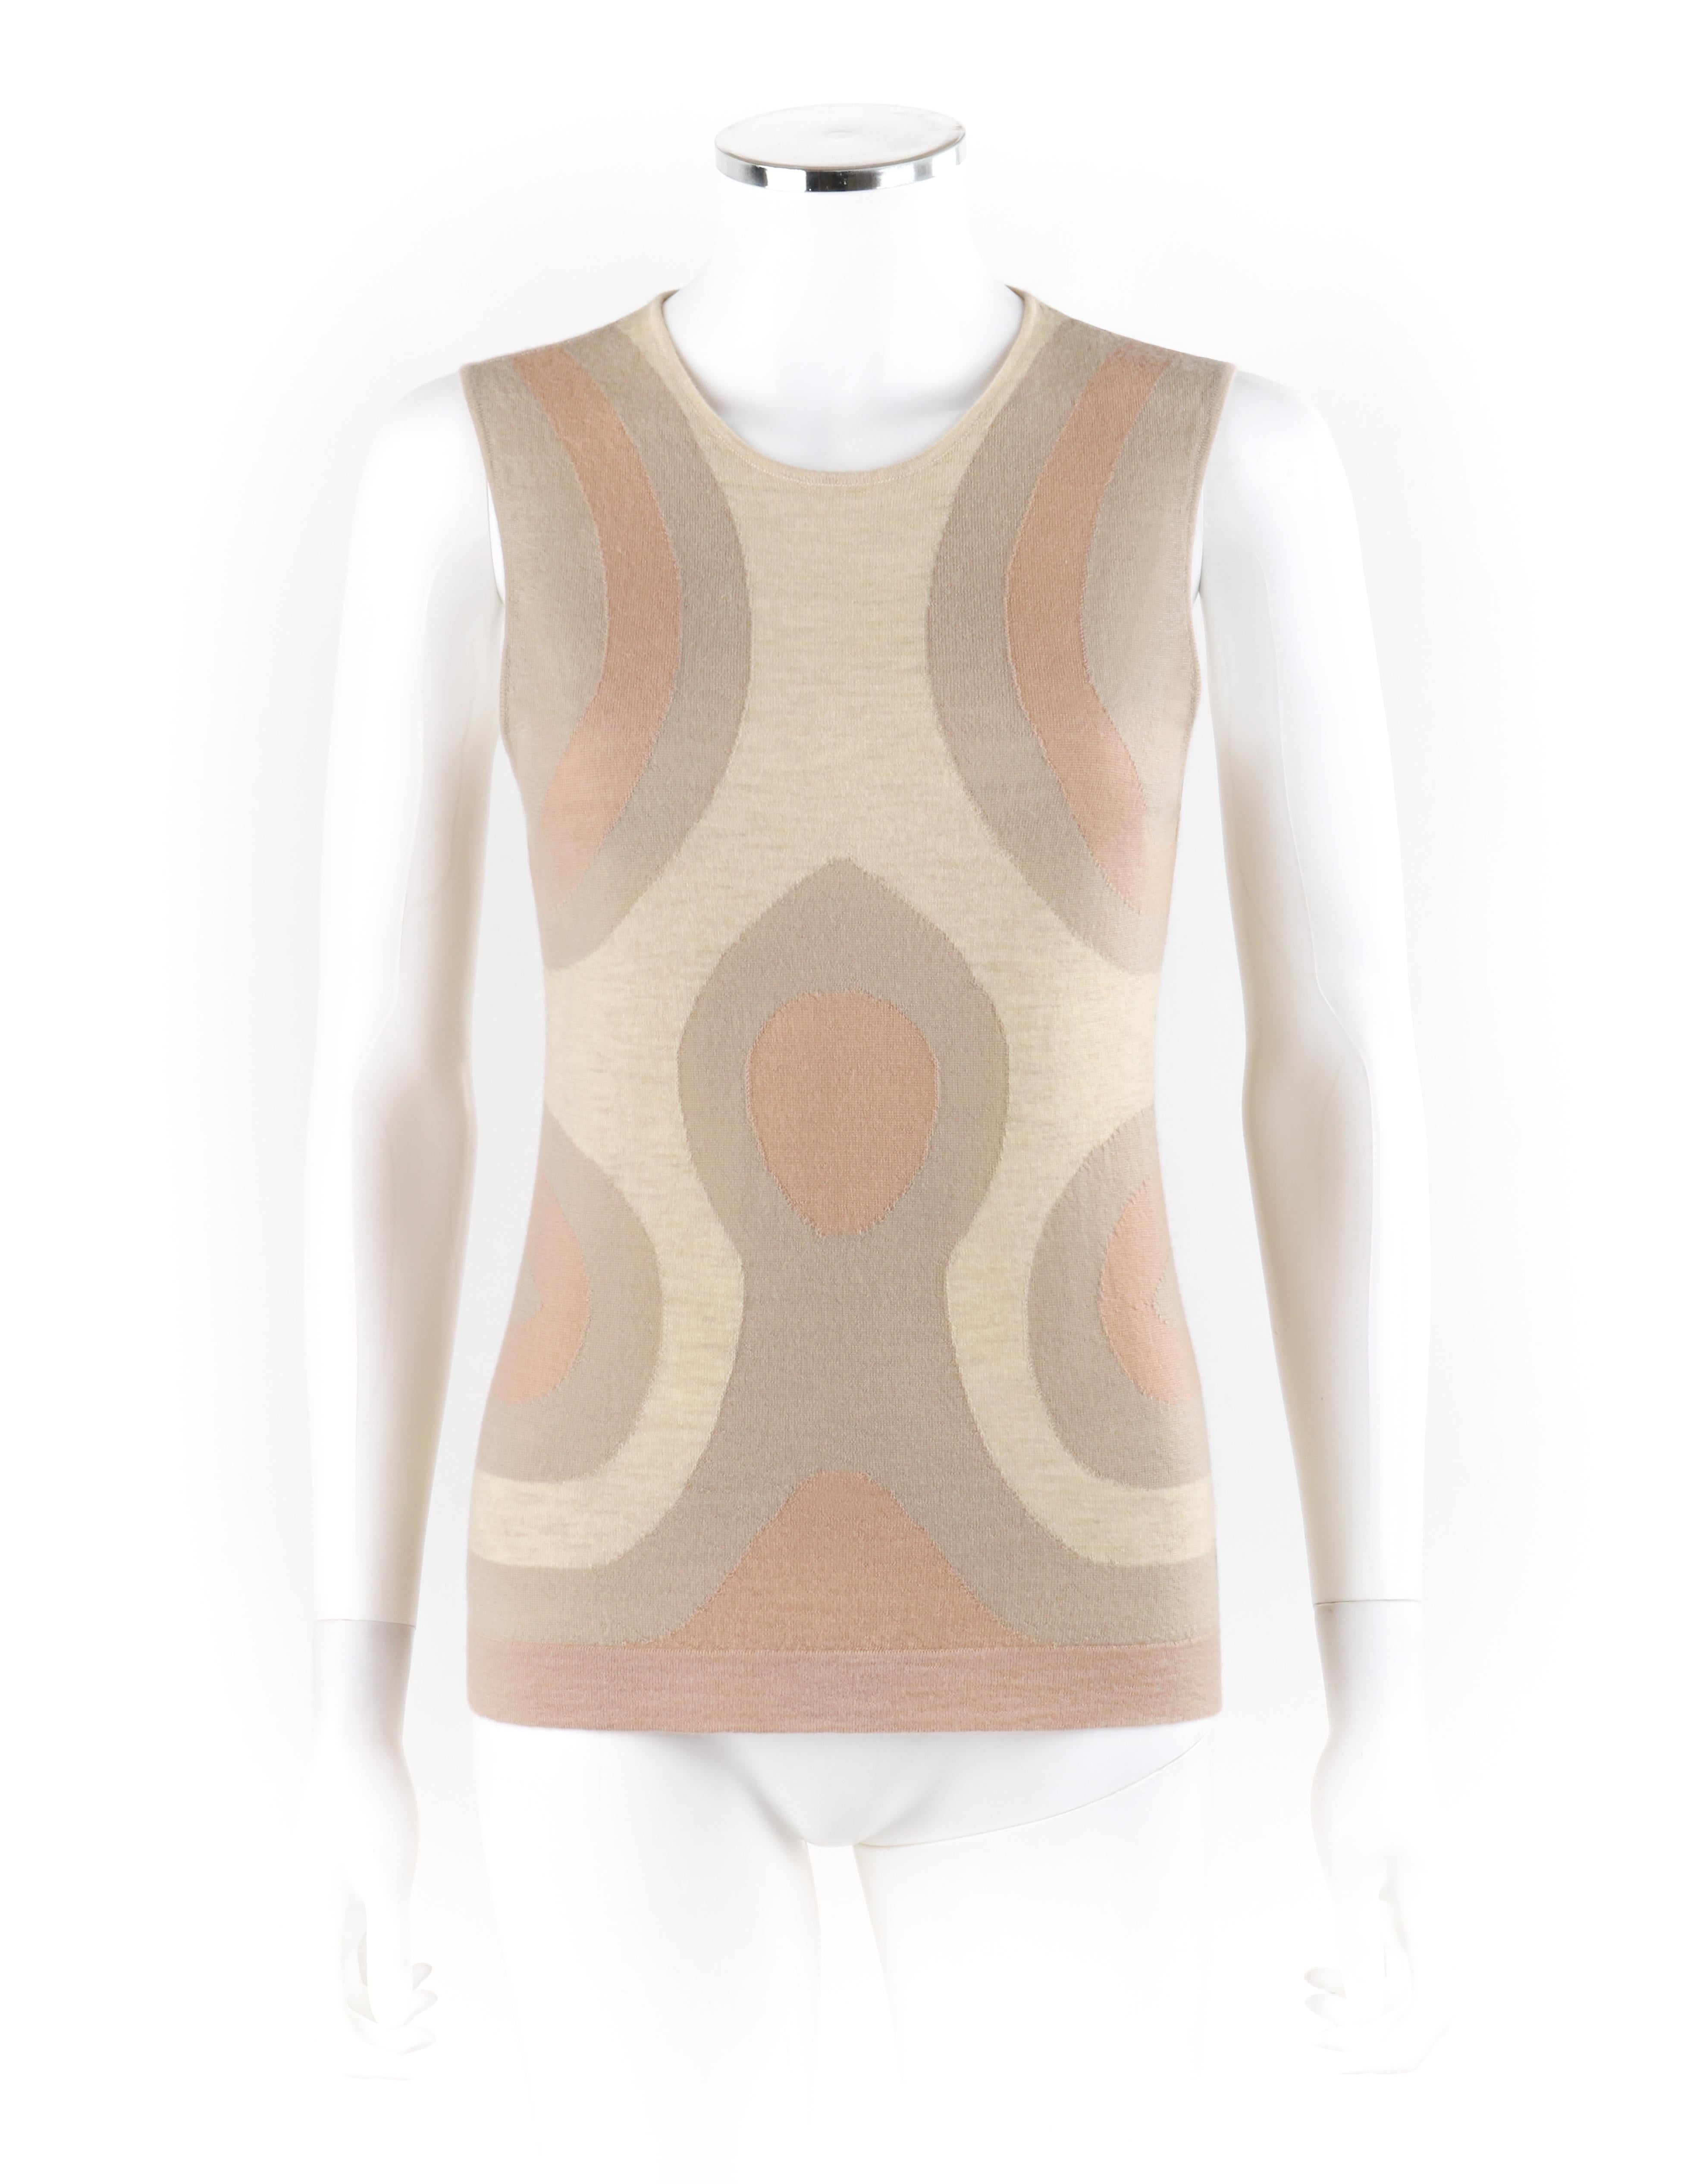 ALEXANDER McQUEEN Resort 2009  Geometric Cashmere Knit Sleeveless Sweater Top
 
Brand / Manufacturer: Alexander McQueen 
Collection: Resort 2009
Designer: Alexander McQueen 
Style: Sweater top
Color(s): Shades of beige, taupe, mauve
Lined: No
Marked